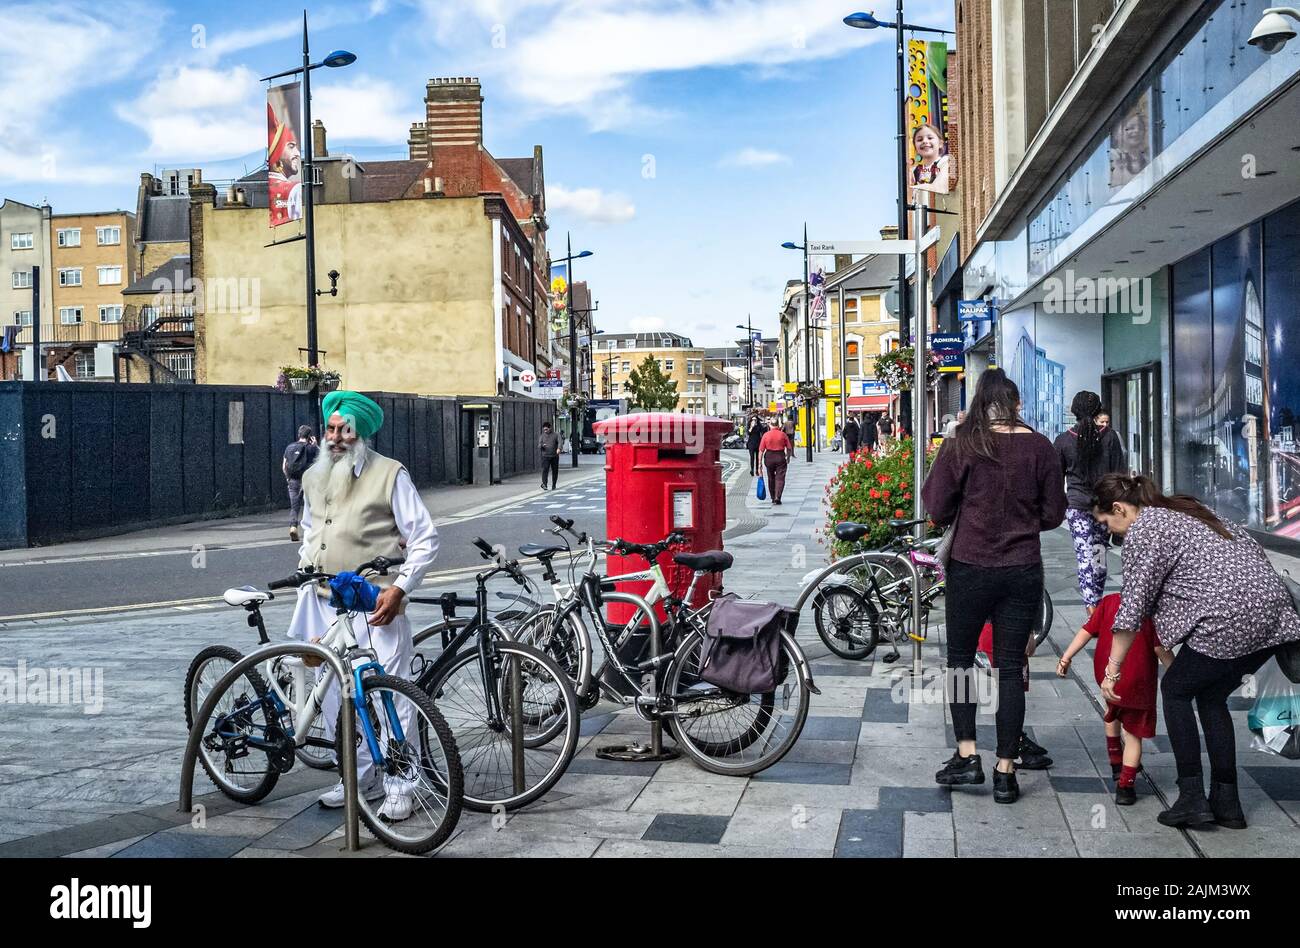 Sikh man (age 60's) in traditional clothes and wearing a green turban, parks his bicycle at a bike rack in Slough city centre (Berkshire, UK) Stock Photo